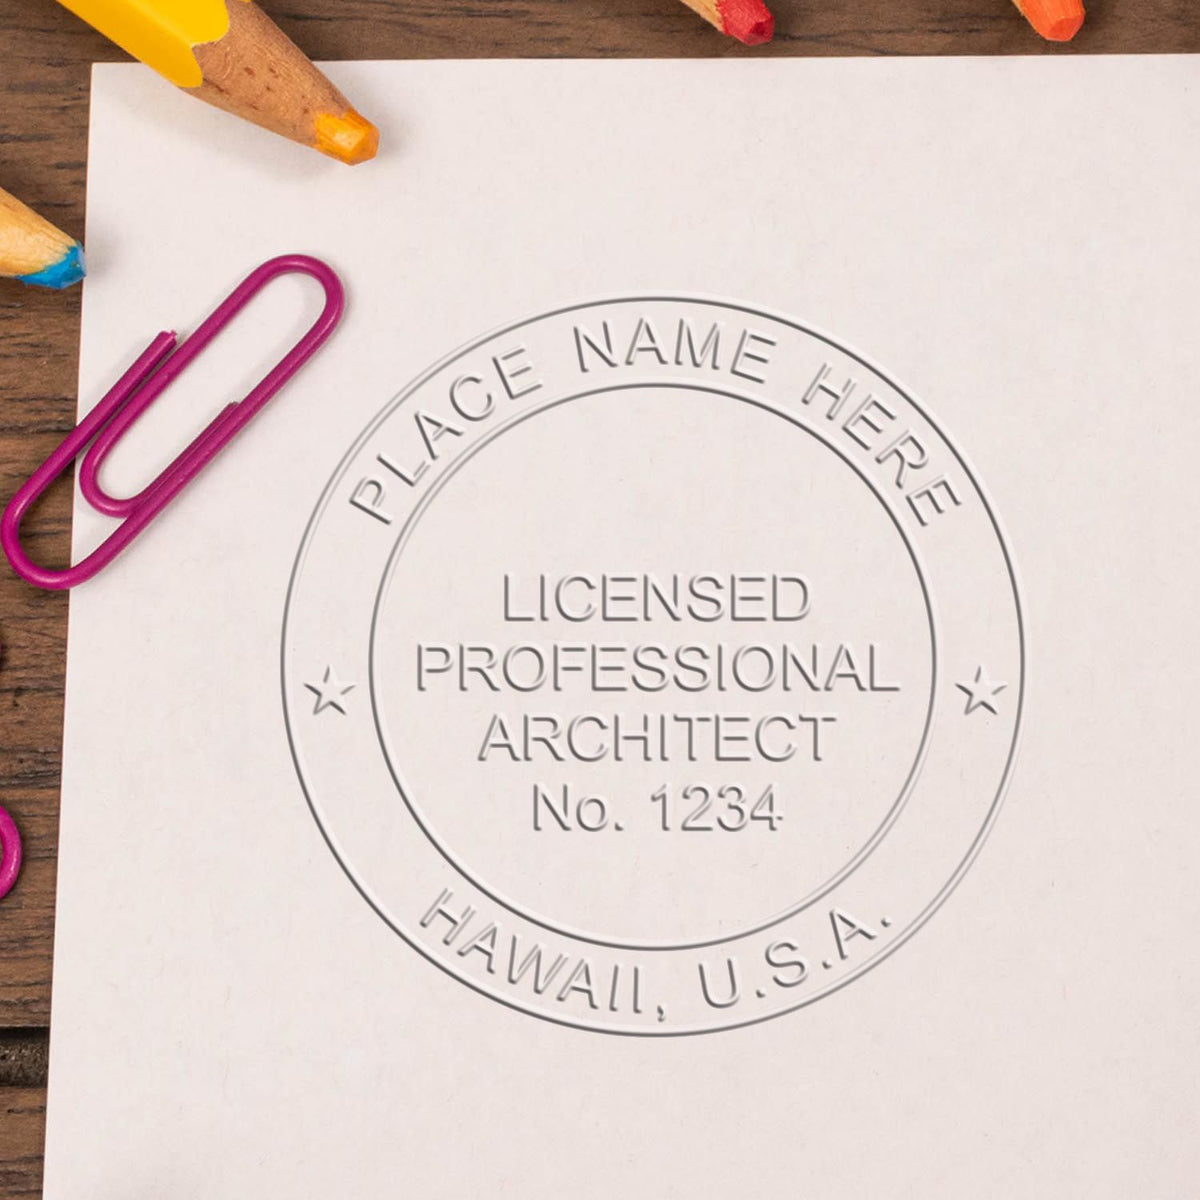 The Gift Hawaii Architect Seal stamp impression comes to life with a crisp, detailed image stamped on paper - showcasing true professional quality.